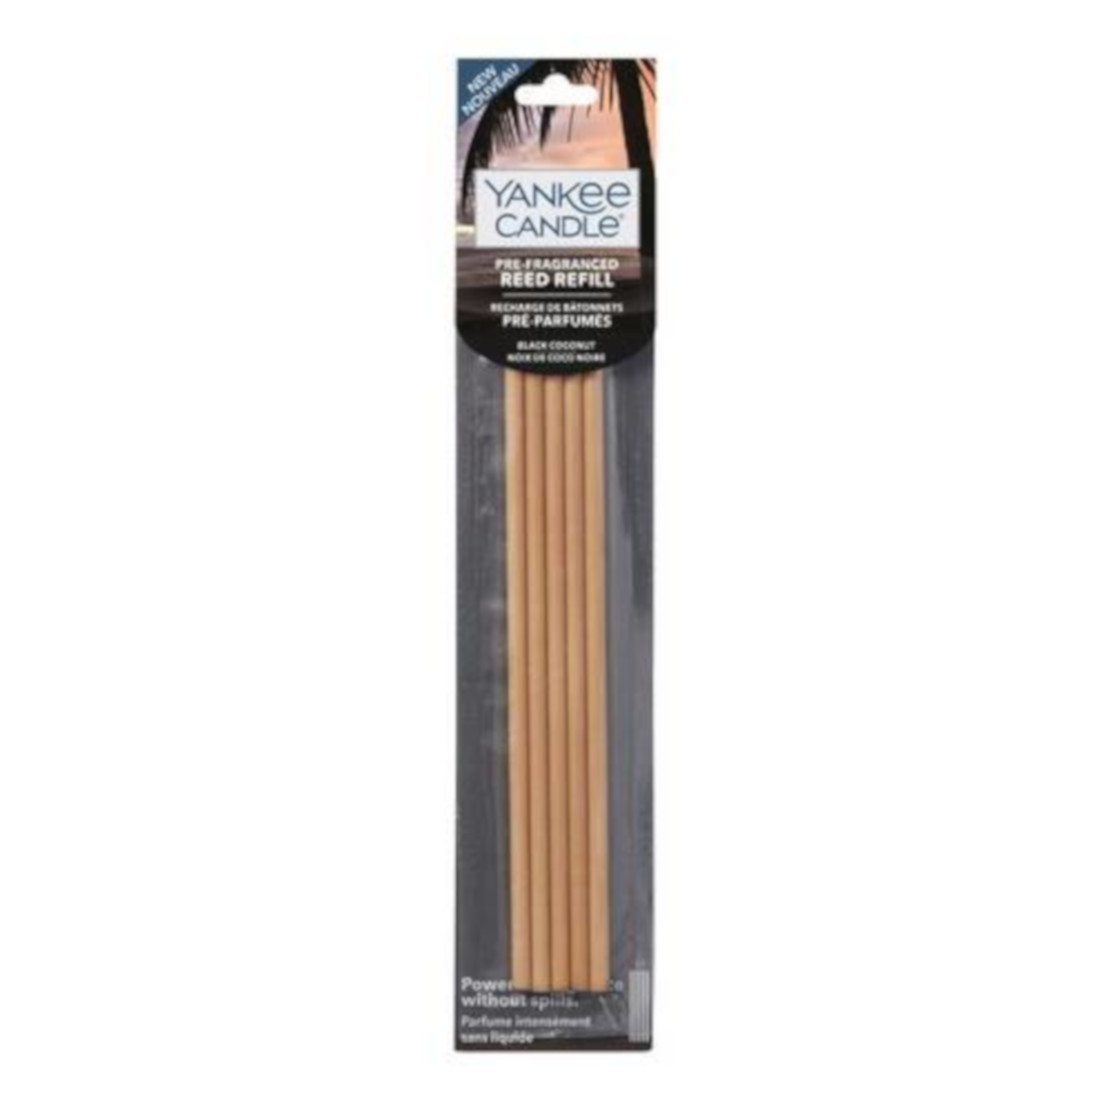 Yankee Candle Black Coconut Pre-Fragranced Reed Diffuser Refills